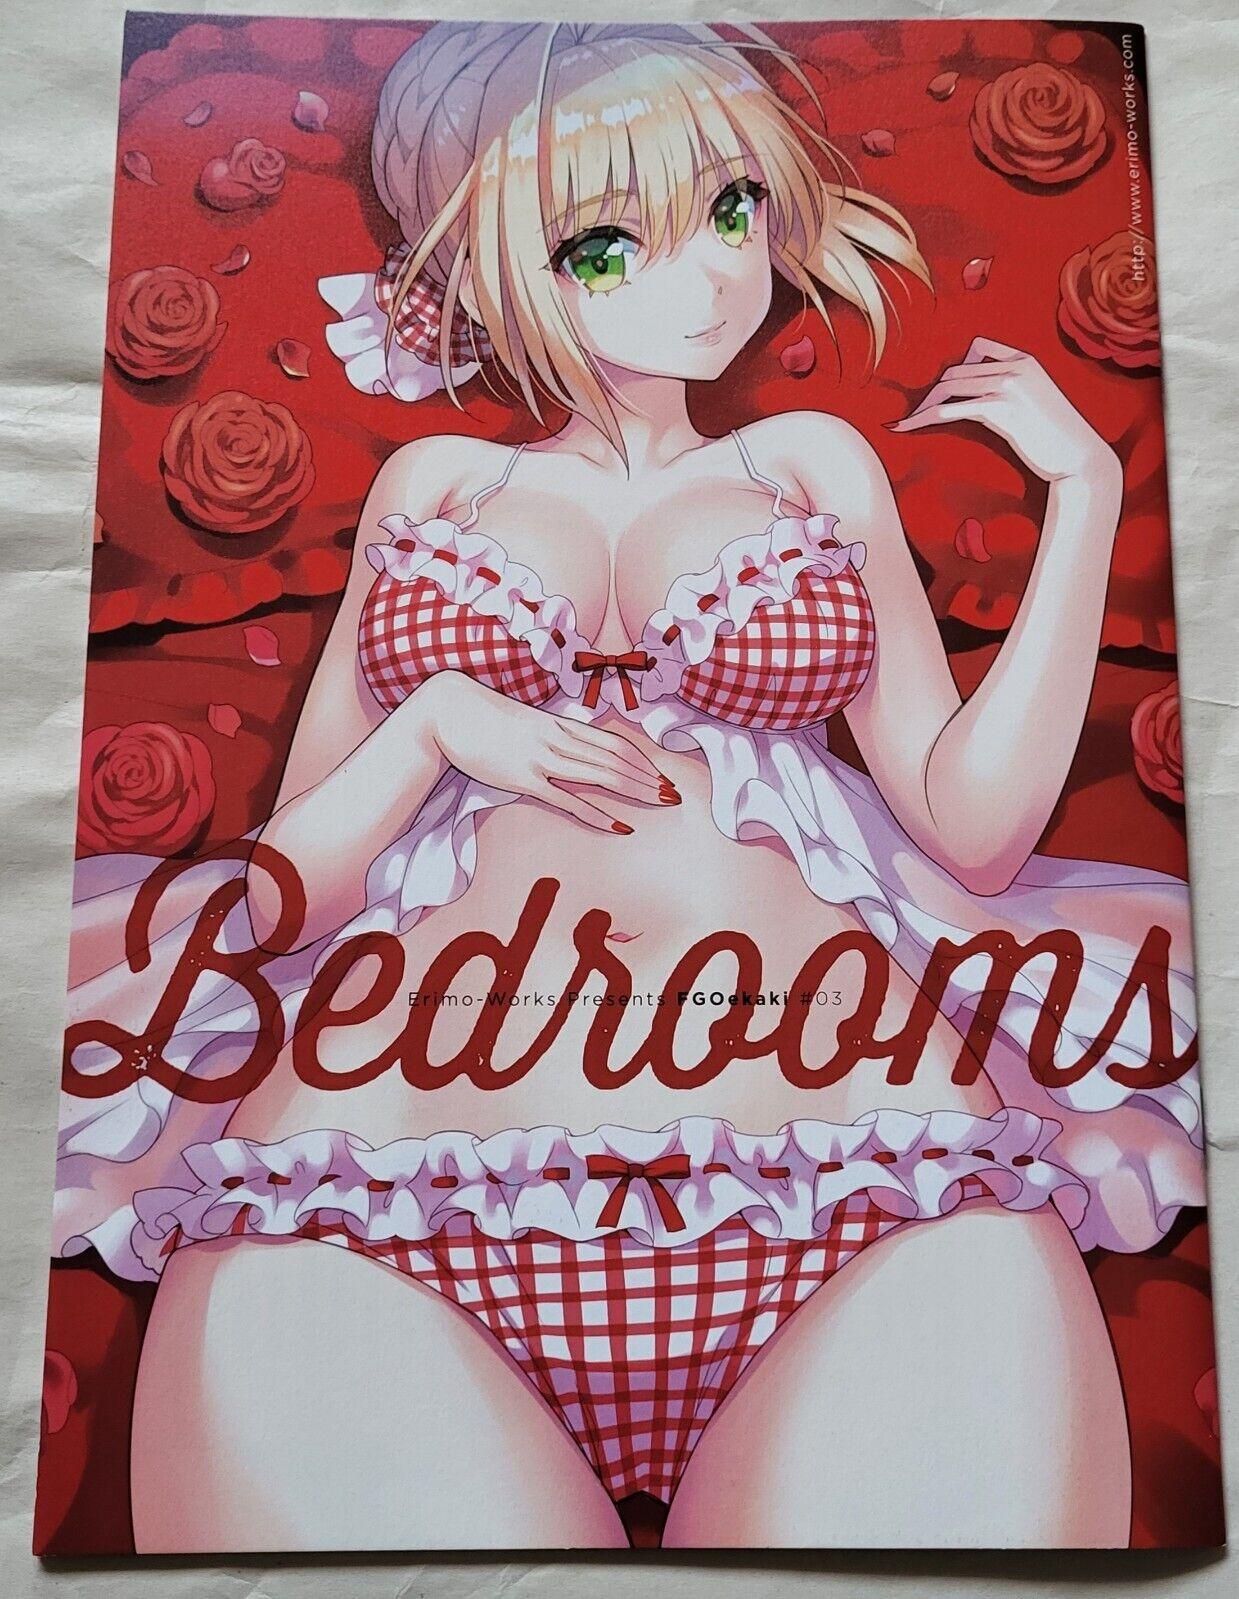 [Erimo] Bedrooms[fate grand order ] sample 0